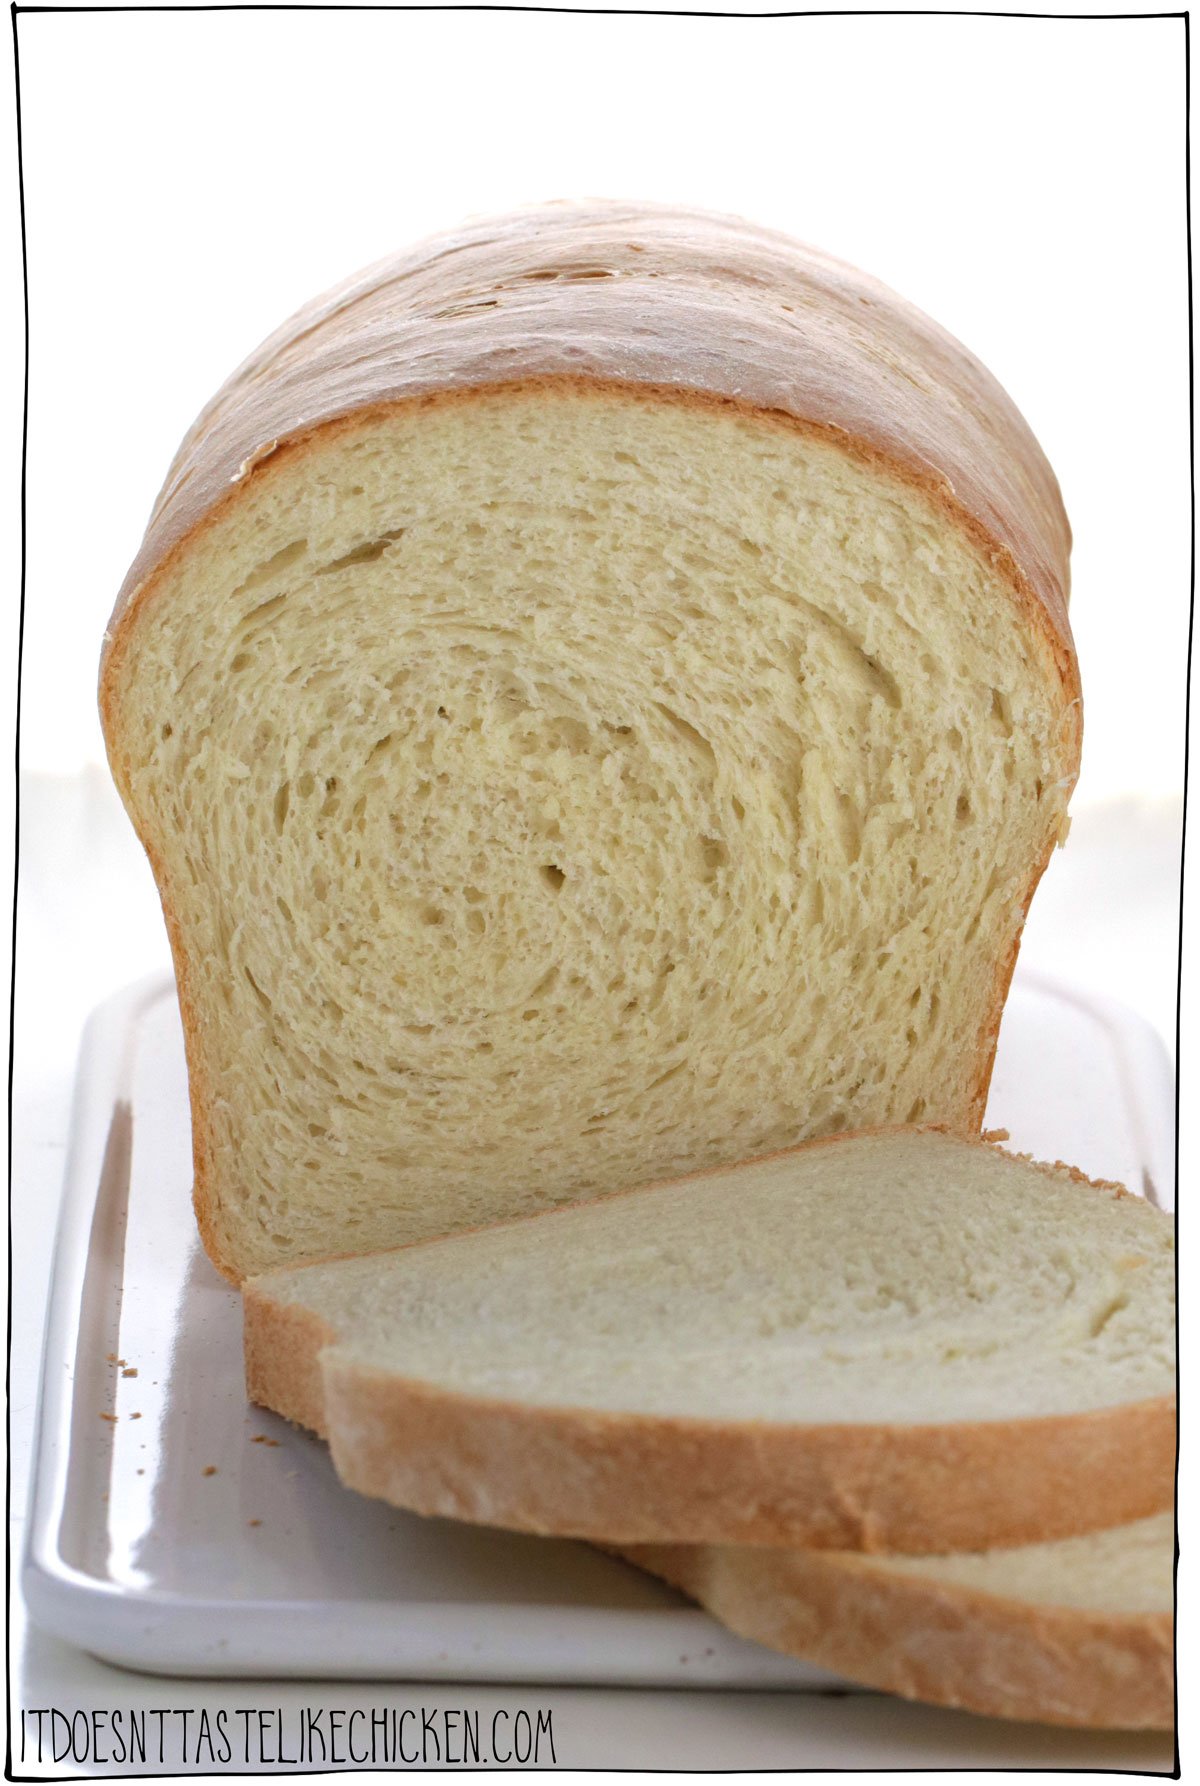 Perfectly fluffy, tender, and strong enough to hold your sandwich toppings. Learn how to make the best vegan sandwich bread from scratch with just 7 simple ingredients that you likely already have in your pantry. I include step-by-step photos to guide you. #itdeosnttastelikechicken #veganrecipes #bread